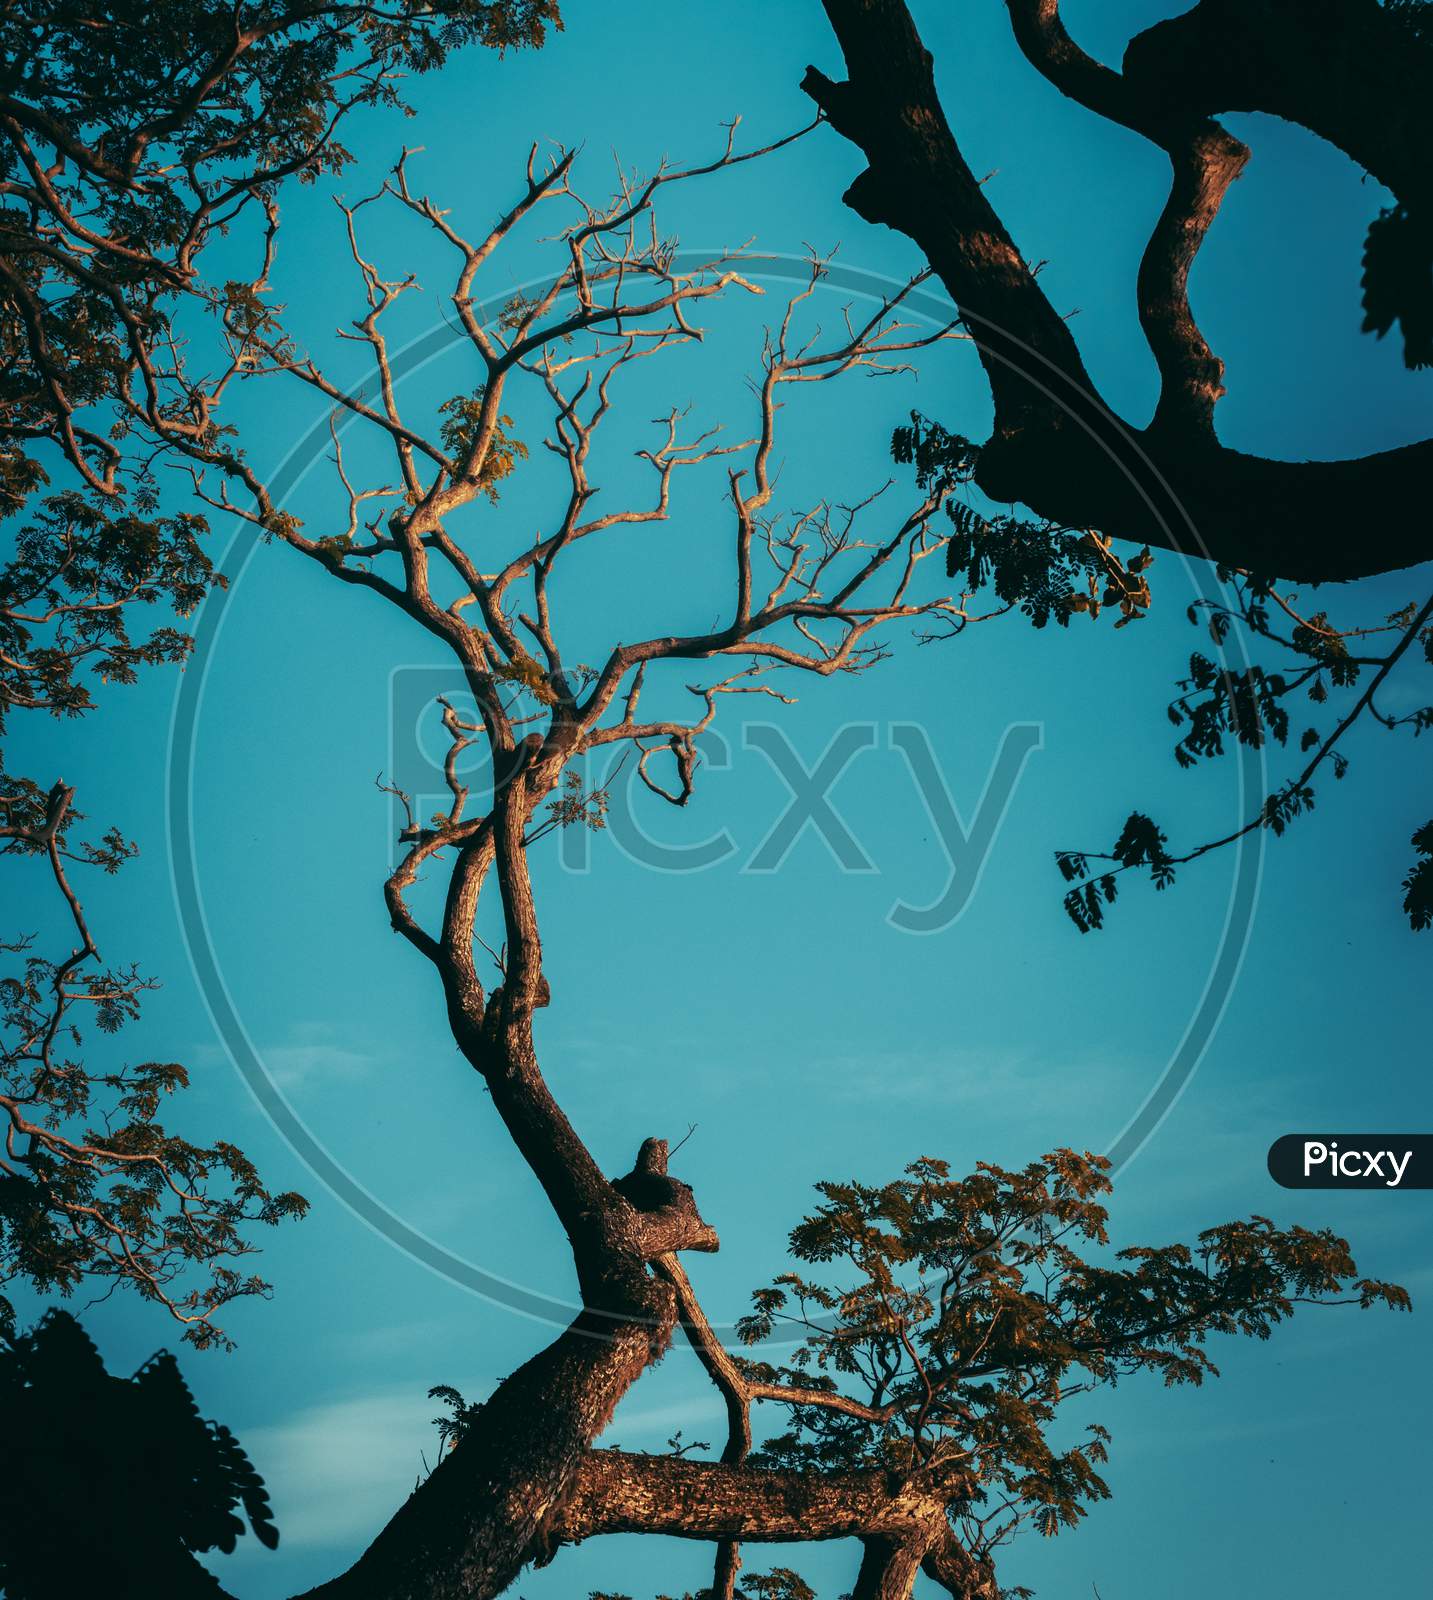 Dark Silhouette Tree Branch And Cool Blueish Tone Evening Sky Photograph, Sunlight Hitting The Top Of The Tree Branches,